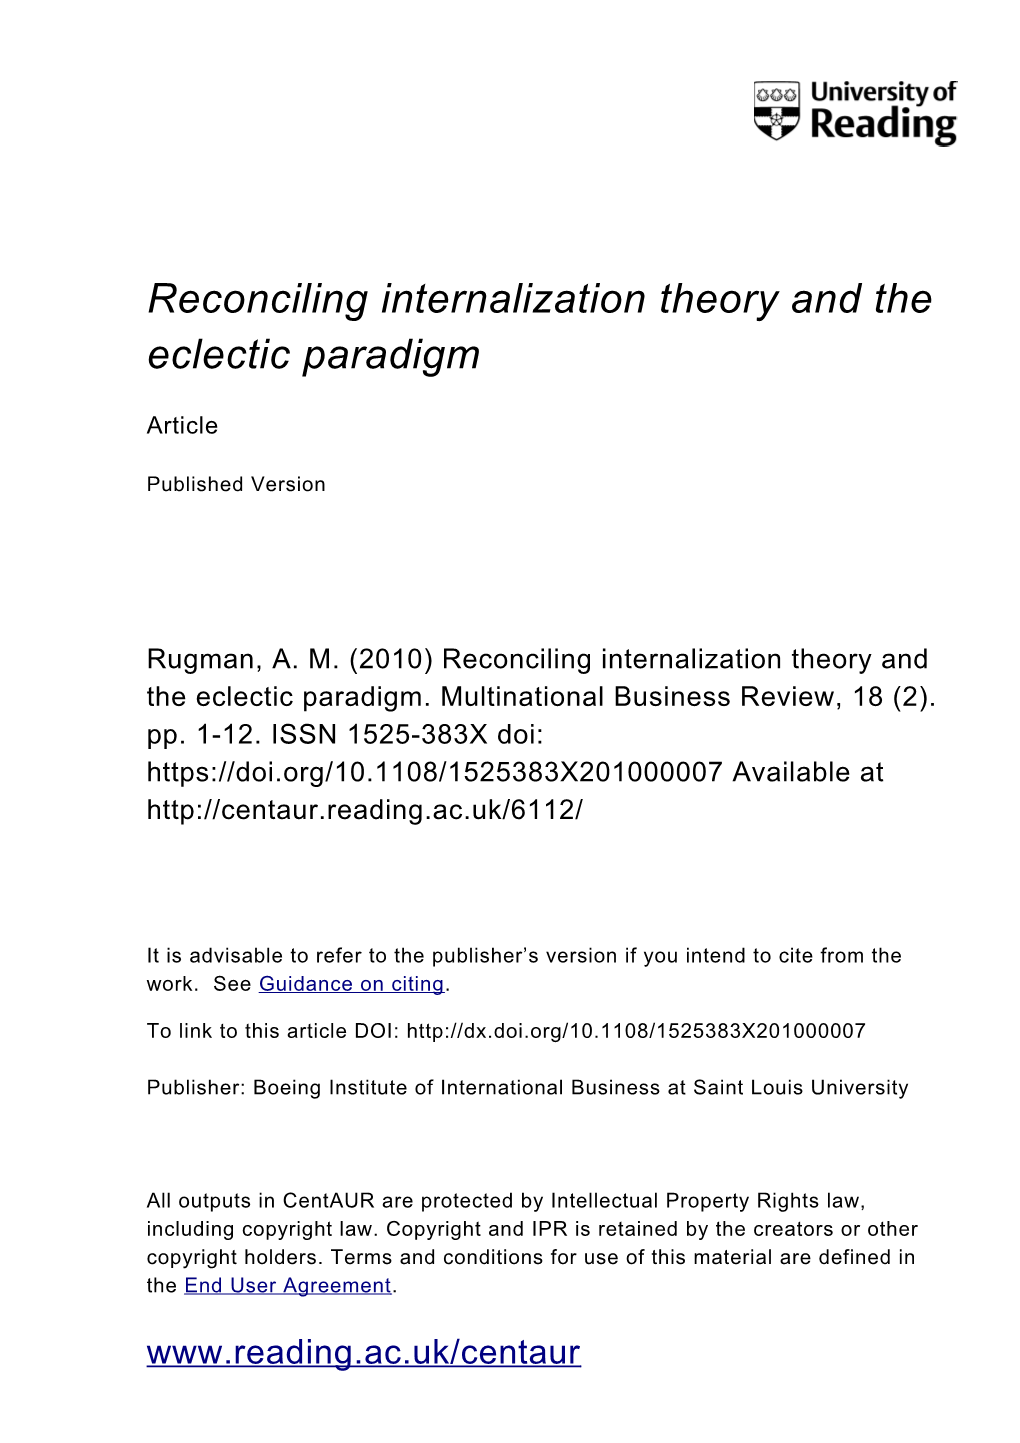 Reconciling Internalization Theory and the Eclectic Paradigm